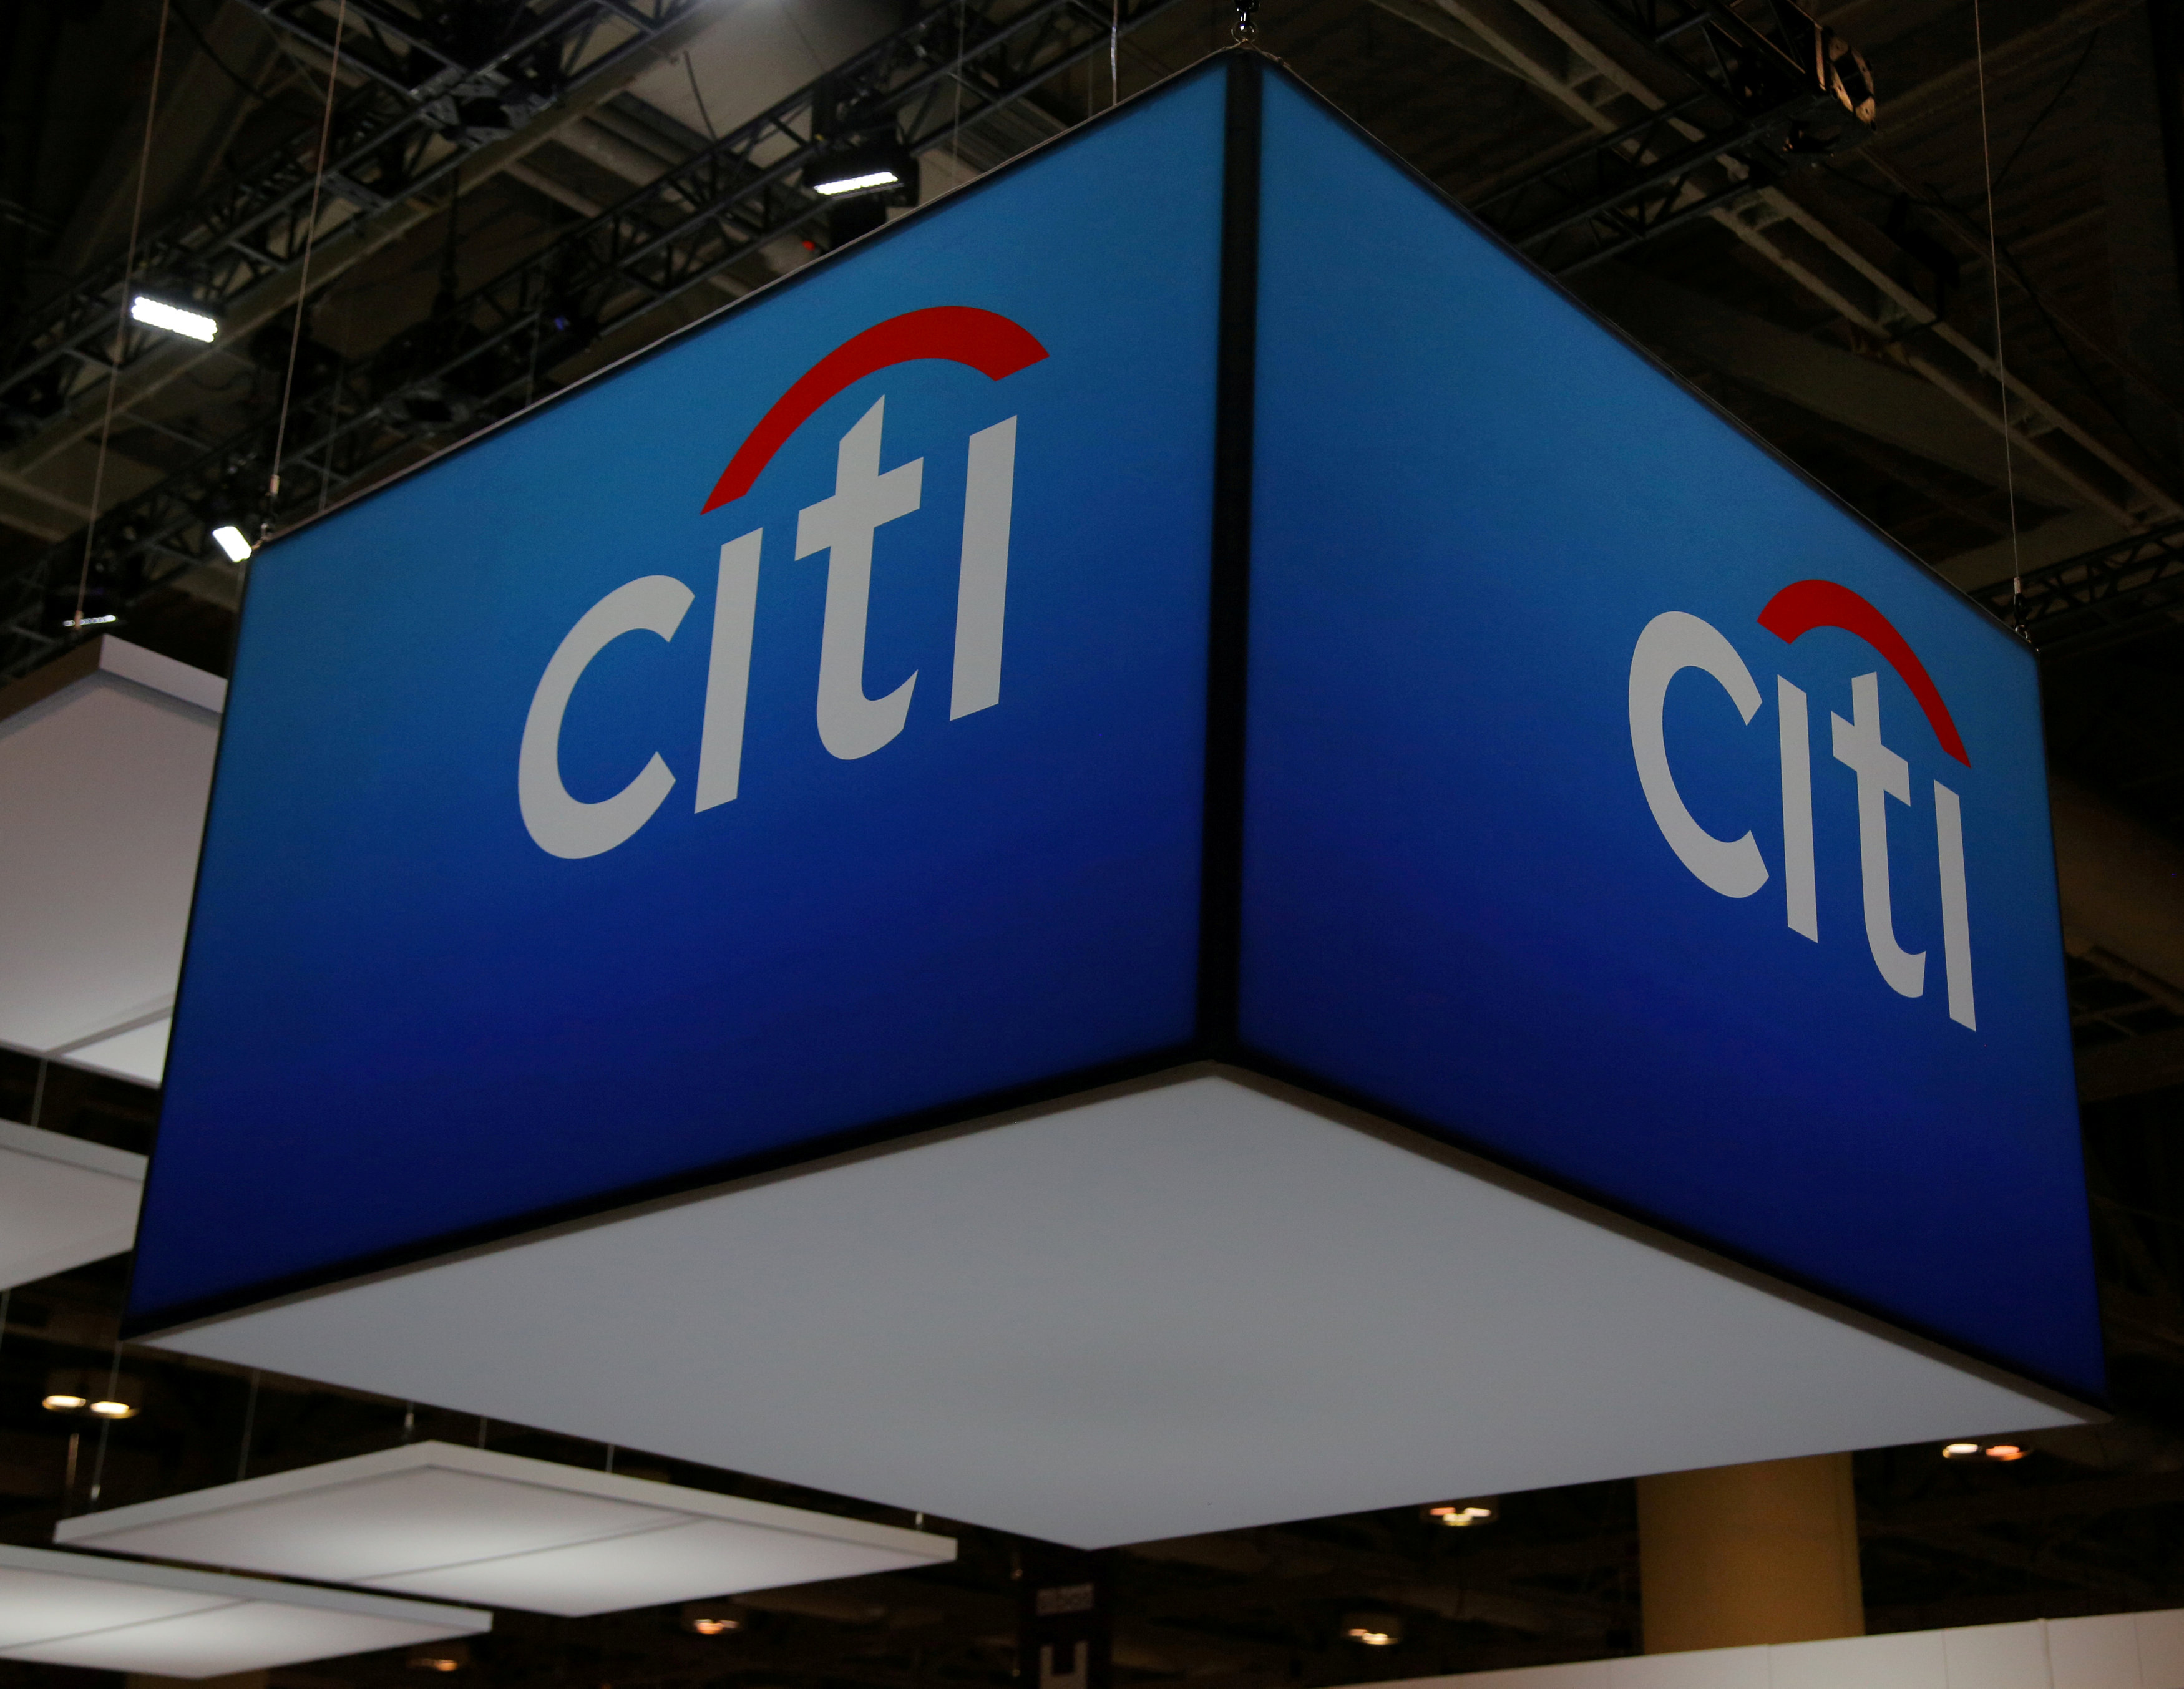 Citigroup executives see better growth ahead, but not yet